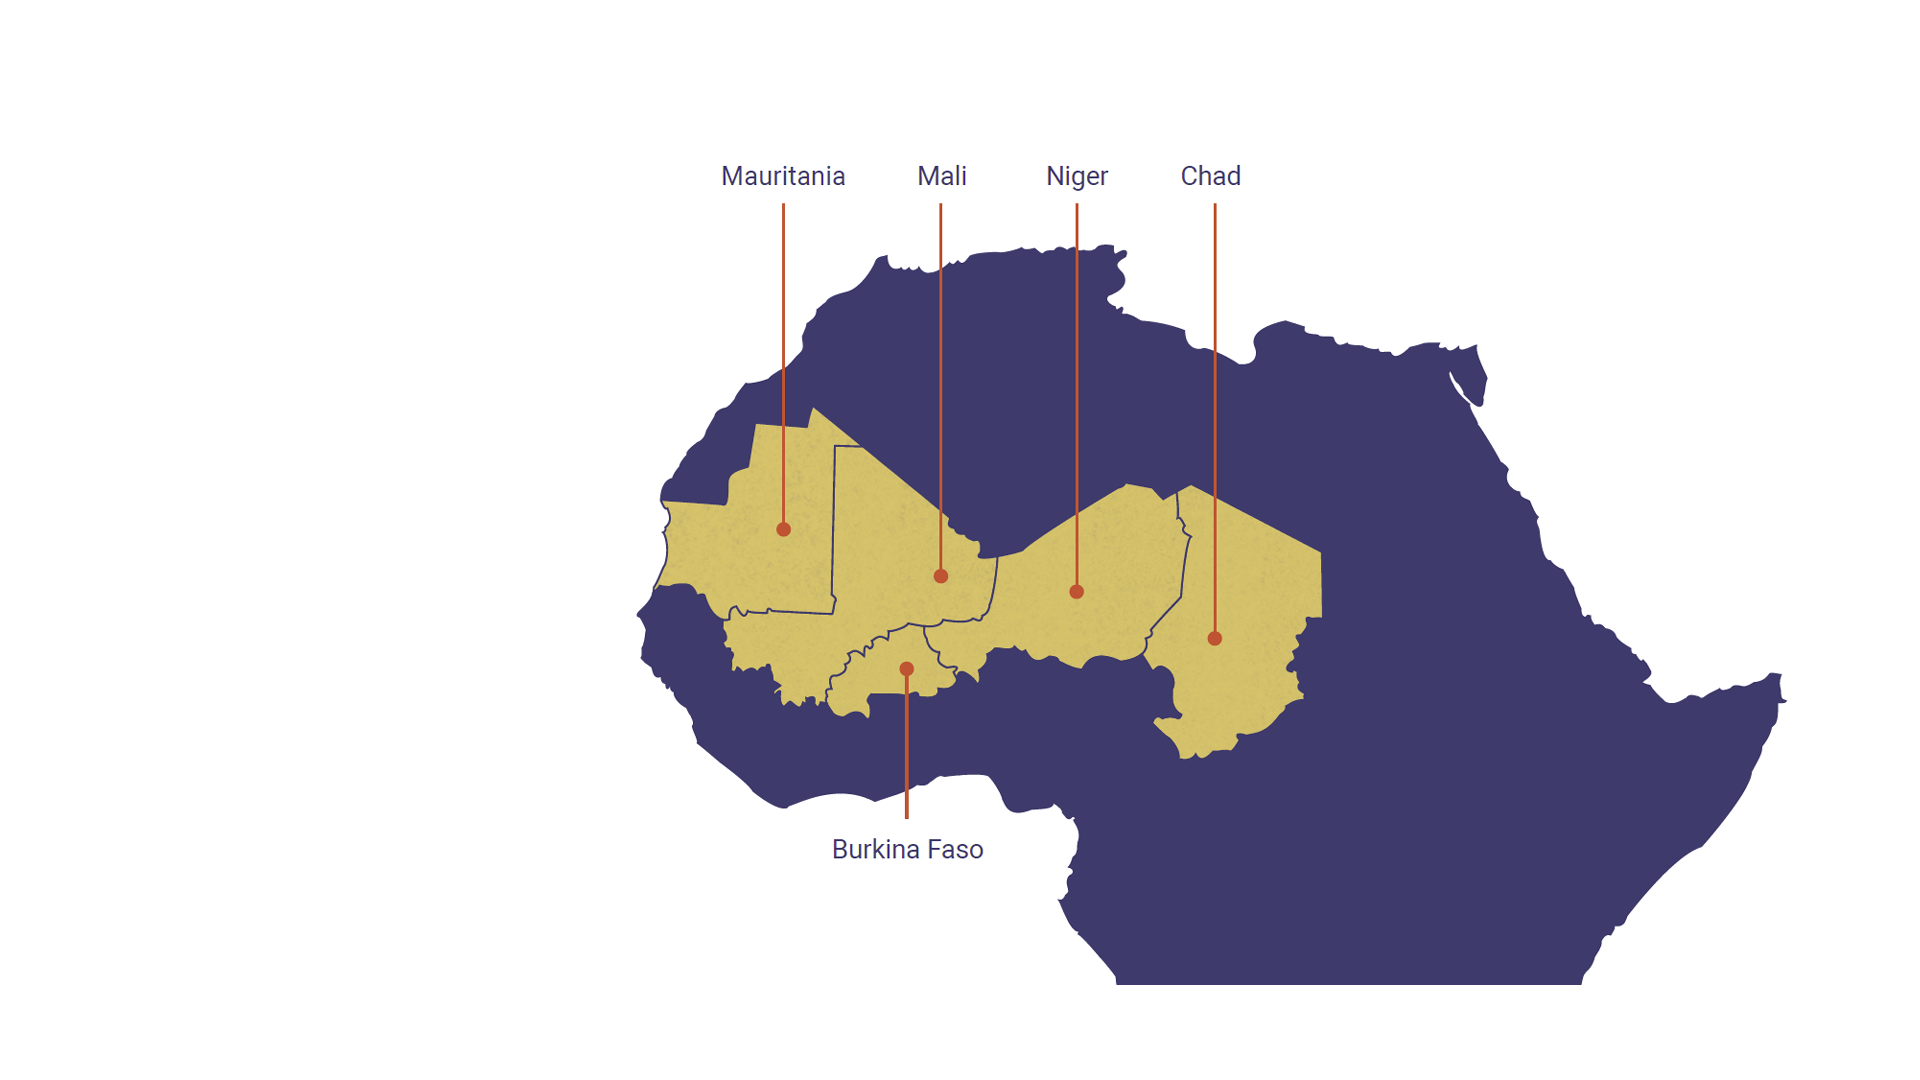 Map of five Sahel states: Mauritania, Mali, Niger, Chad and Burkina Faso | Screenshot from the publication "The Sahel Alliance at a glance"